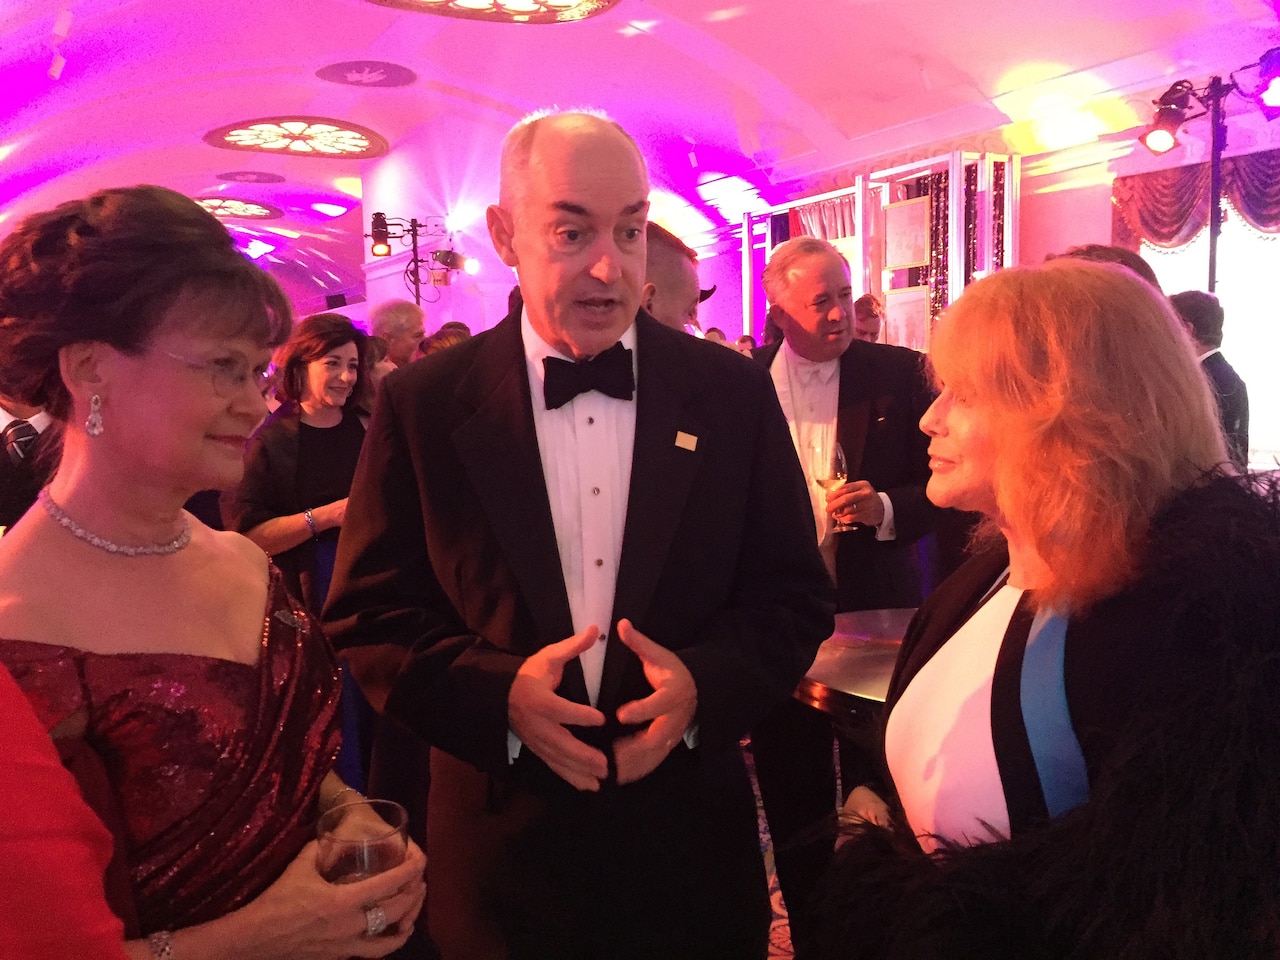 J.D. Crouch II, the USO’s chief executive officer and president, and his wife, Kris, speak with USO legend Ann-Margaret at the 75th Anniversary USO Gala at the Daughters of the American Revolution Constitution Hall in Washington, D.C., Oct, 20, 2016. DoD photo by Jim Garamone